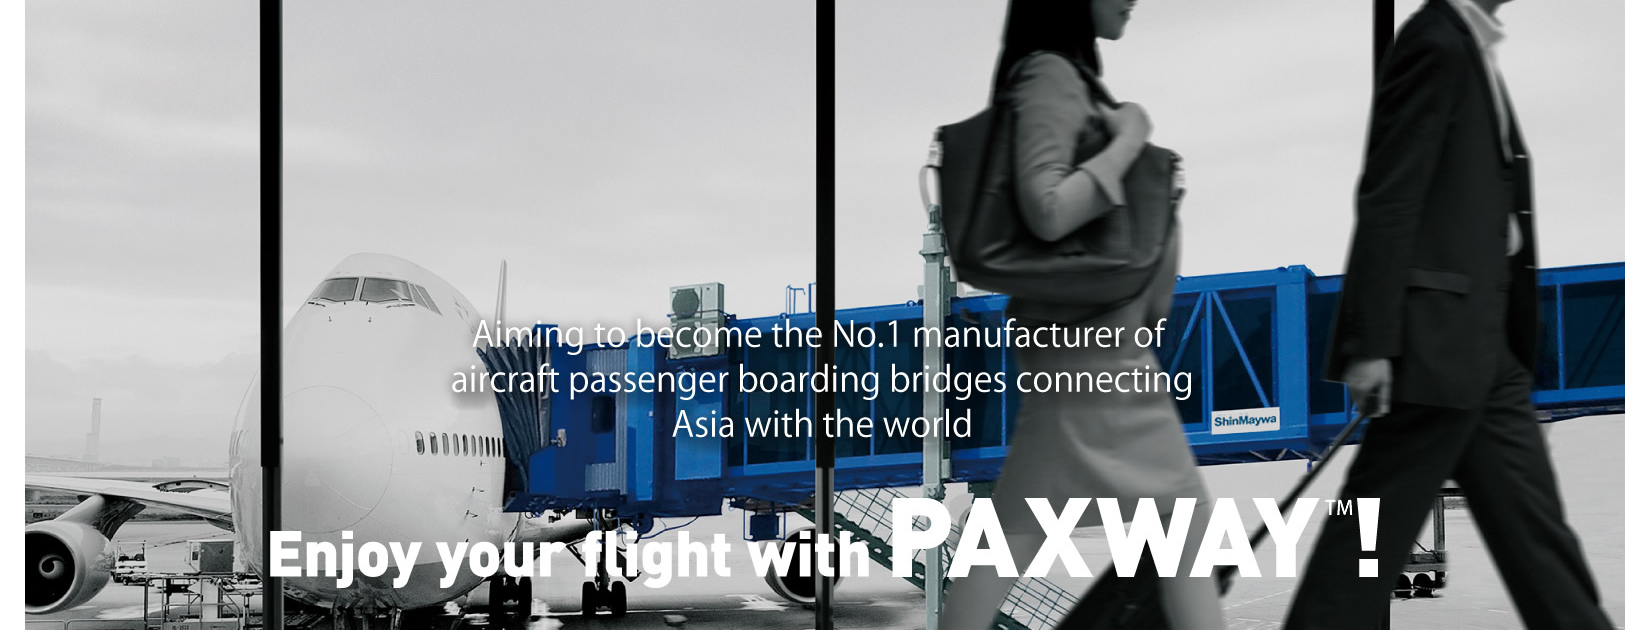 Enjoy your flight with PAXWAY!